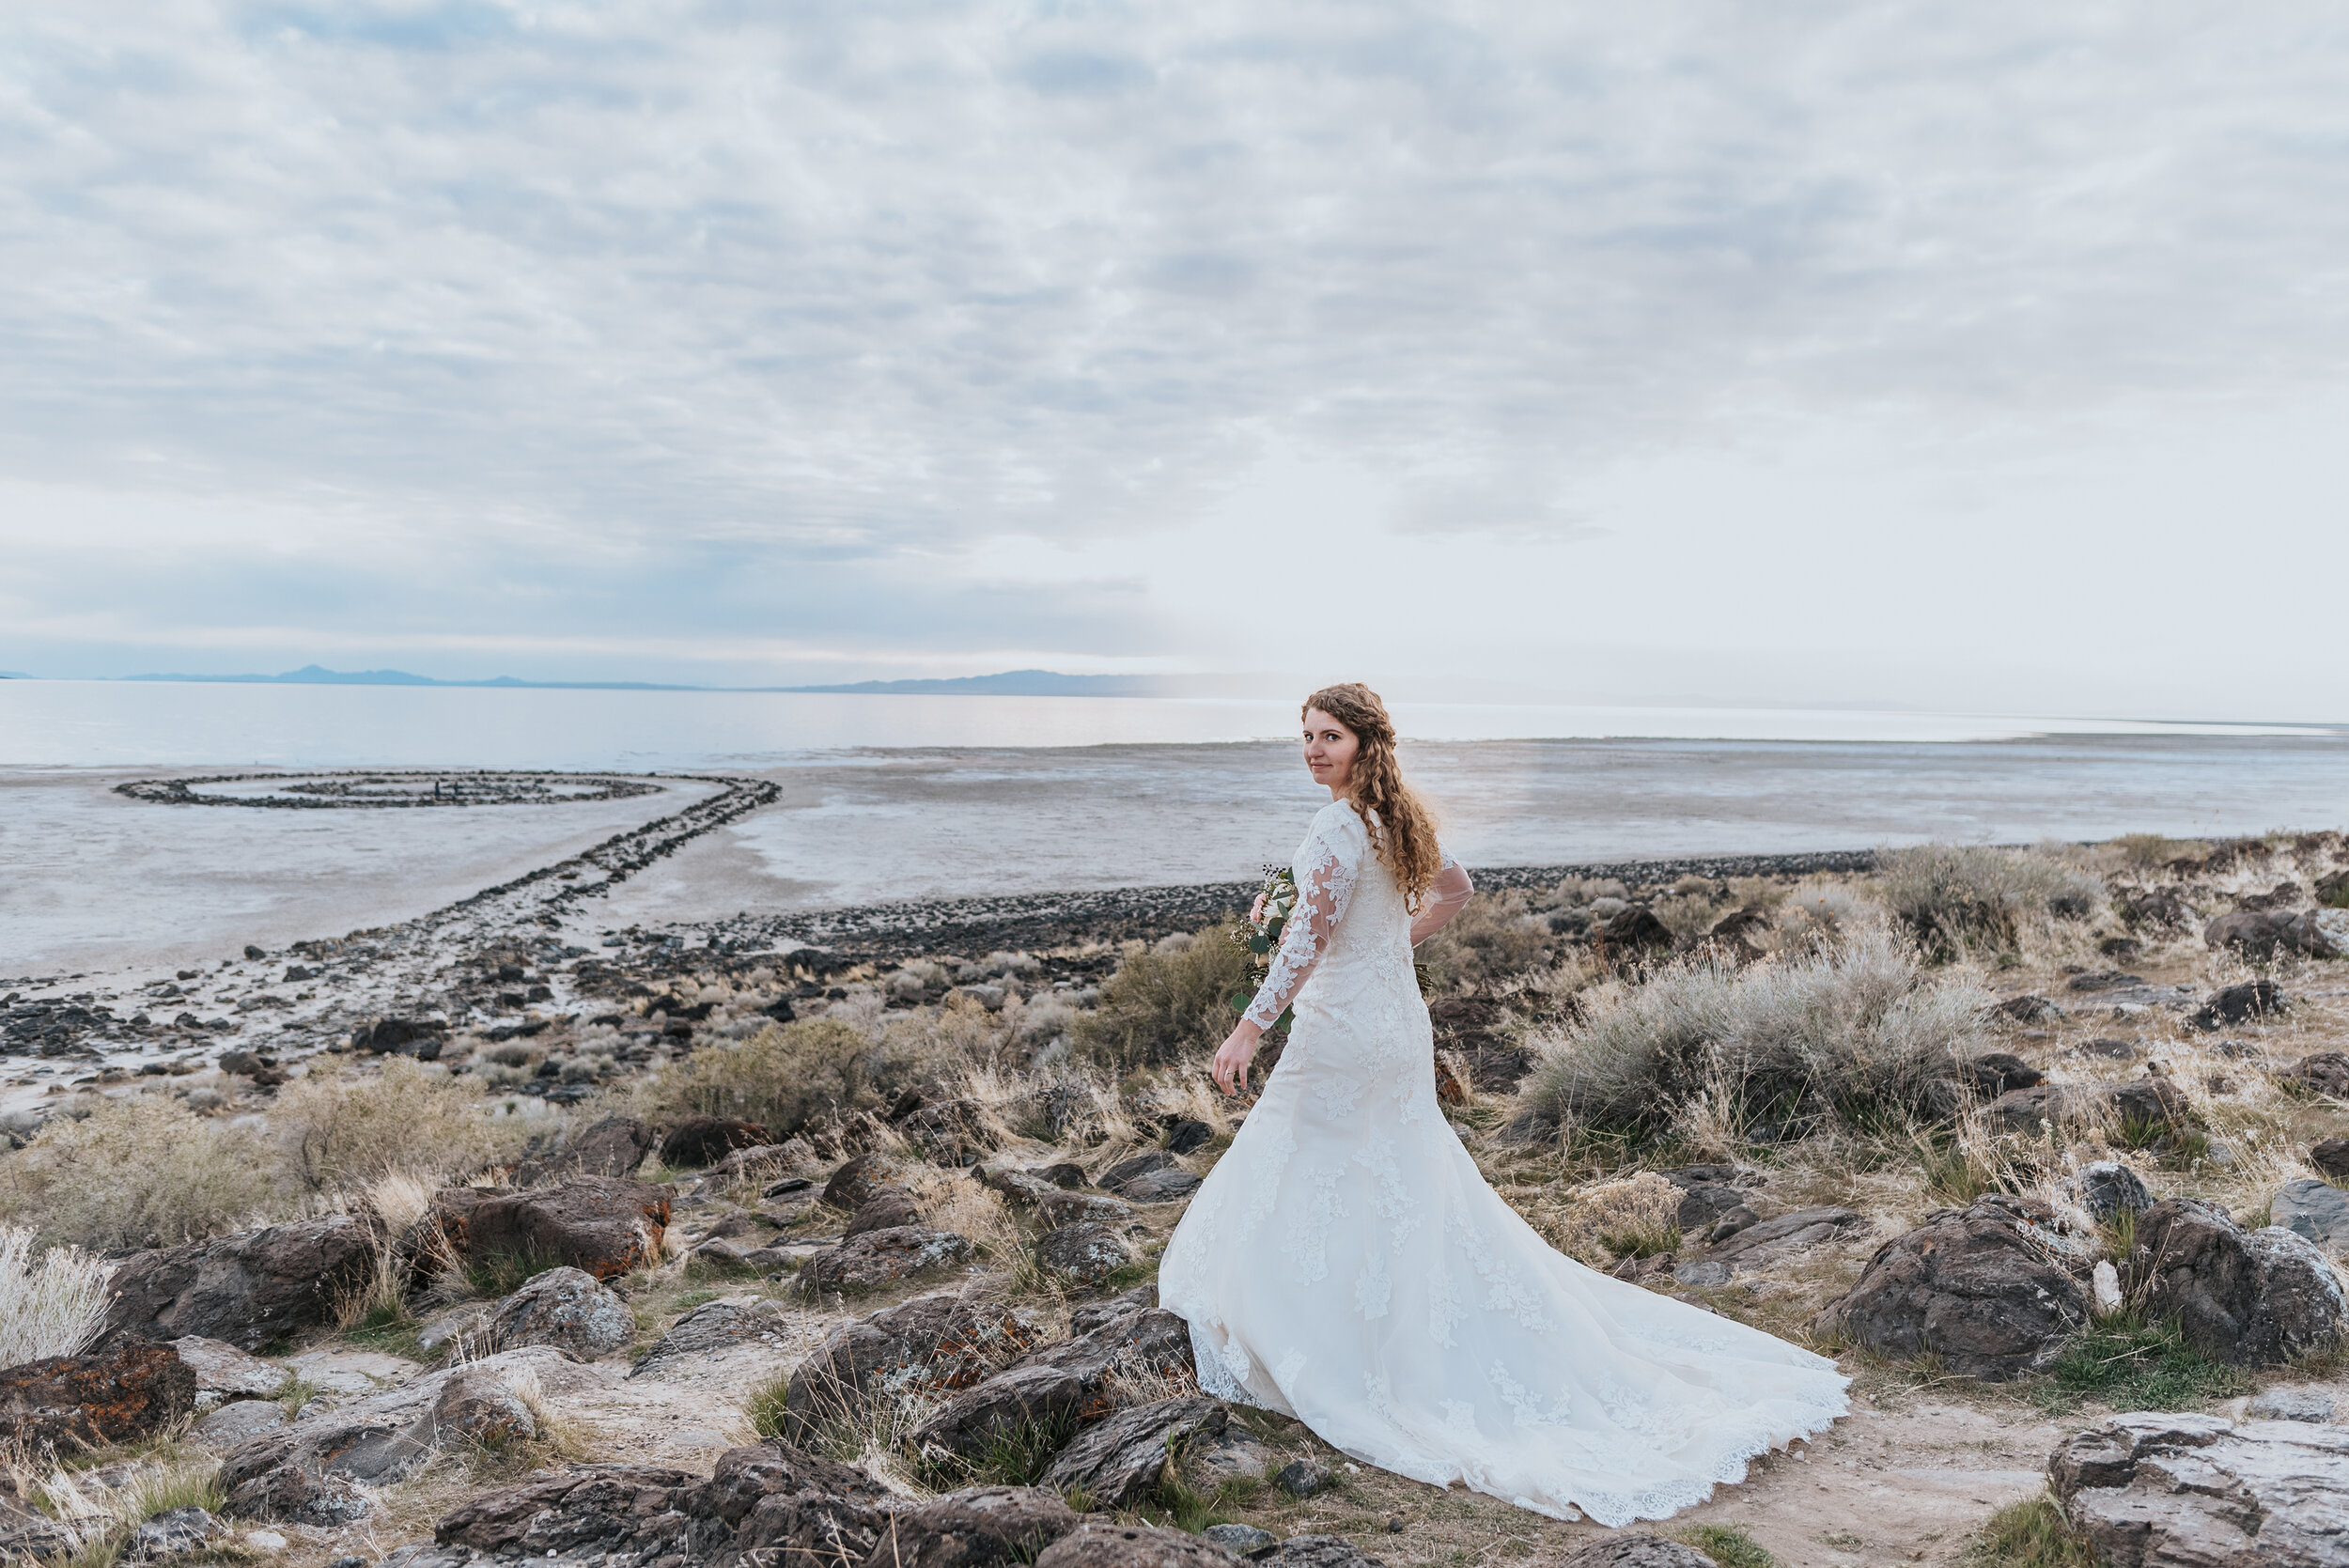  The full wedding gown and train for this bride was covered in lace from her shoulders down to the very end of her train that rushed over the rocks of the Spiral Jetty. Wedding formal photoshoot in Spiral Jetty Northern Utah Great Salt Lake photography wedding formals natural photo aesthetic bride and groom #spiraljetty #utahphotography #weddingformals #gettingmarried #weddingattire #utahwedding #greatoutdoorswedding #weddingformalsphotoshoot #naturalbeauty 